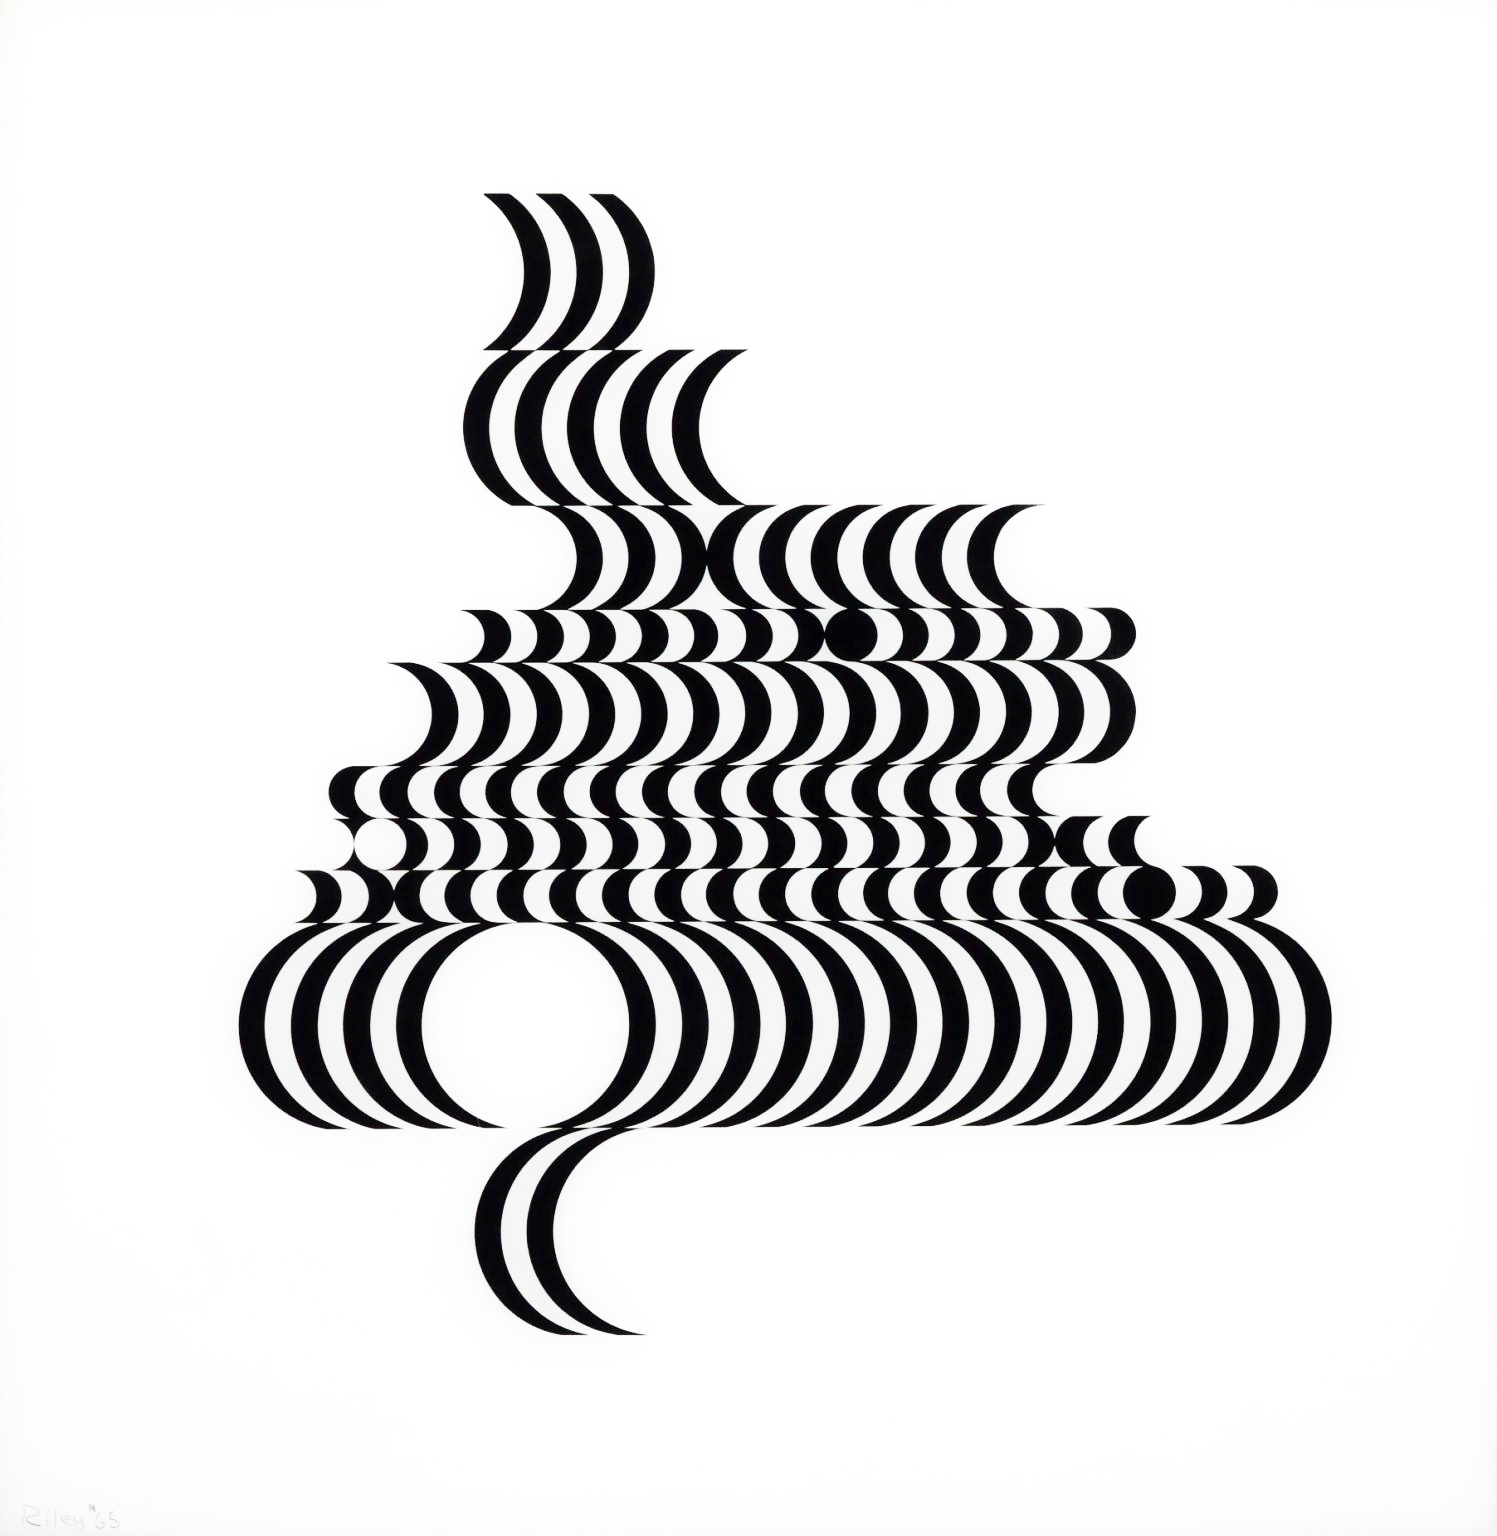 An untitled piece by Bridget Riley (1965) featuring black lines in an abstract shape